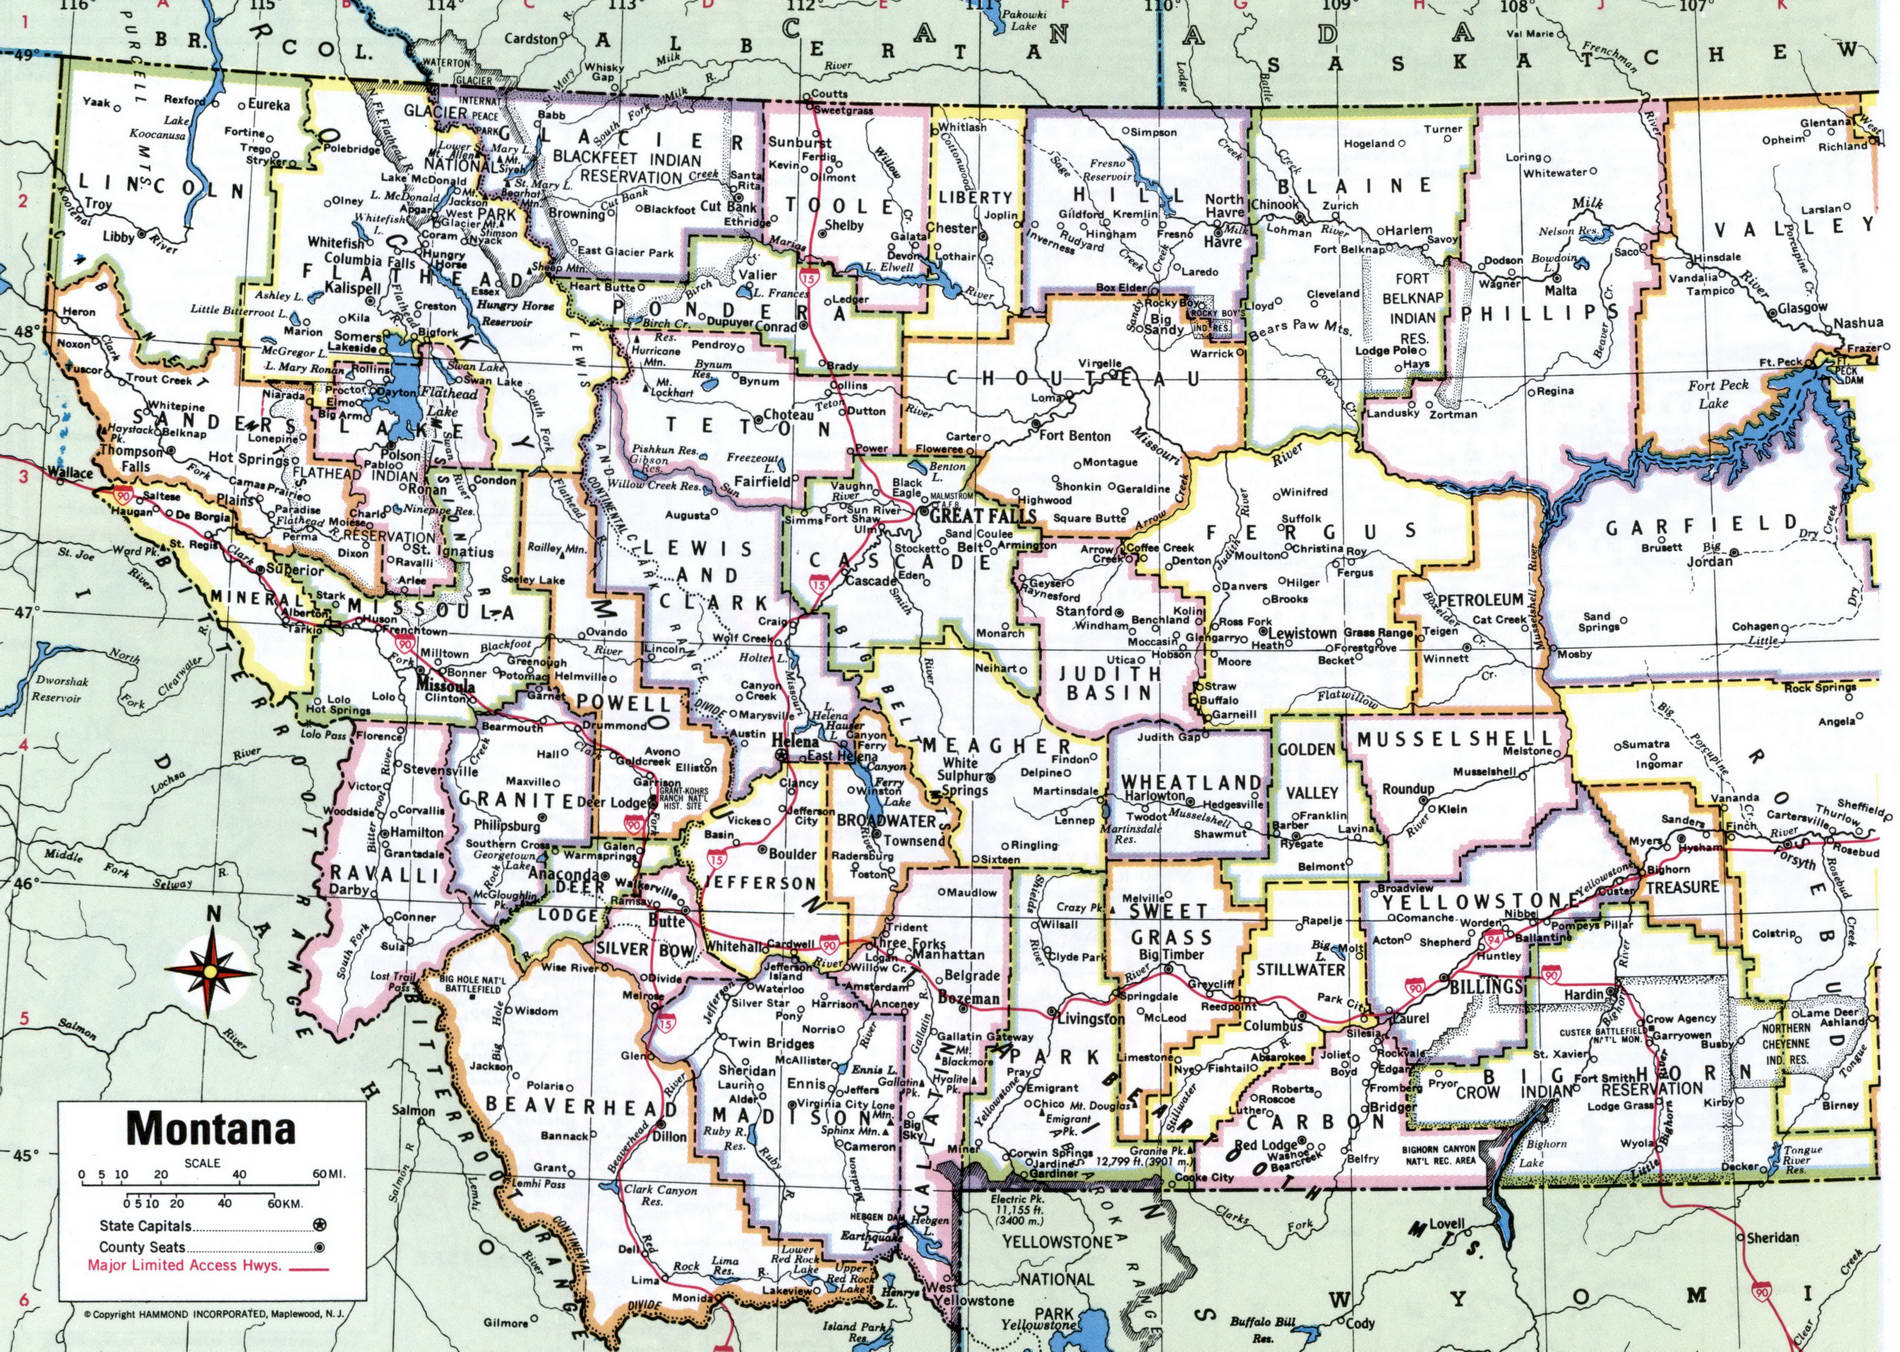 Counties of Montana state